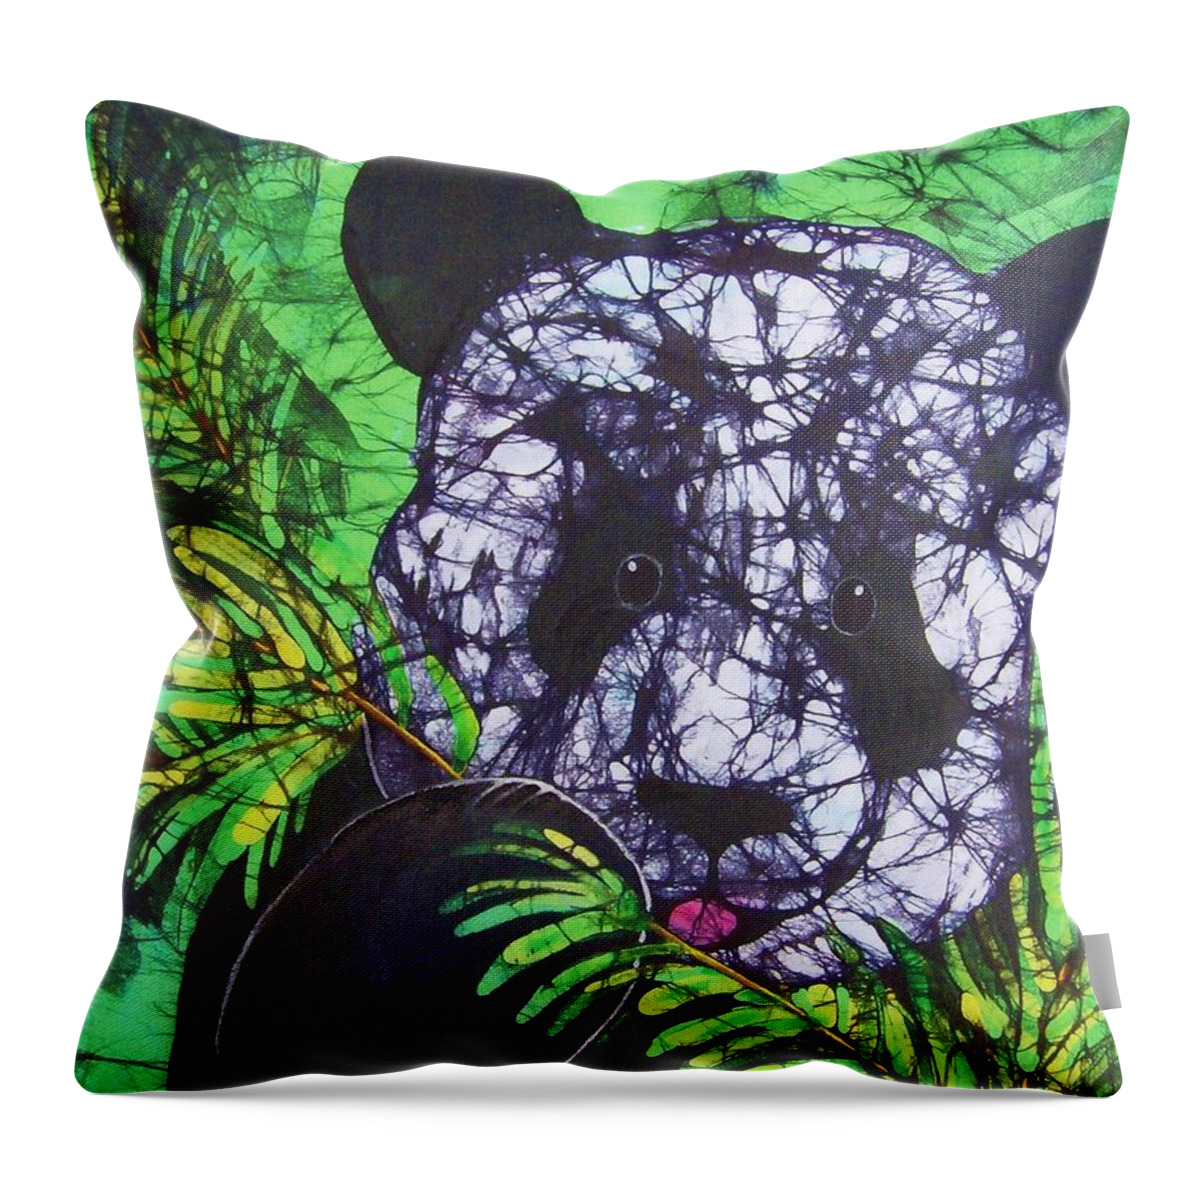 Panda Throw Pillow featuring the tapestry - textile Panda Snack by Kay Shaffer